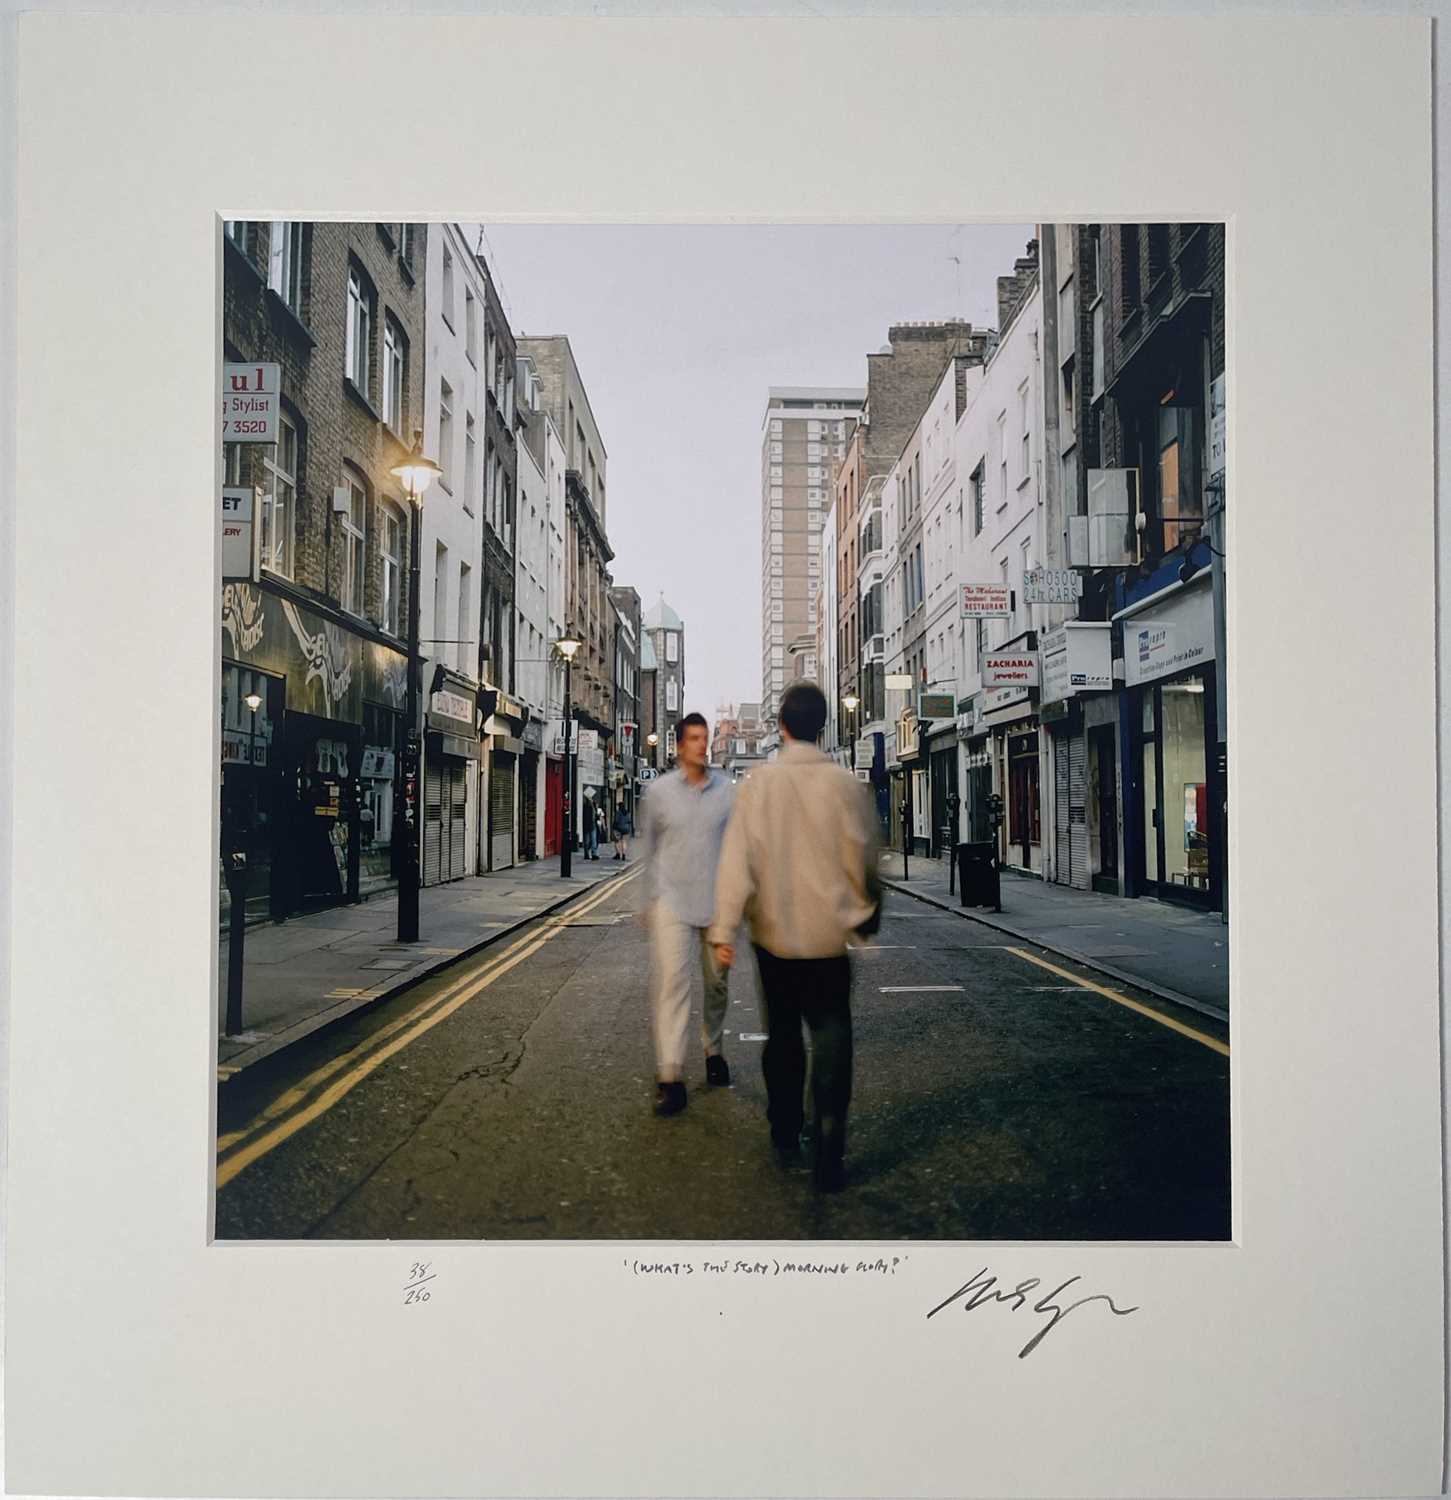 Lot 188 - OASIS - MICHAEL SPENCER JONES TWICE SIGNED 'WHAT'S THE STORY' LIMITED EDITION PHOTO PRINT.